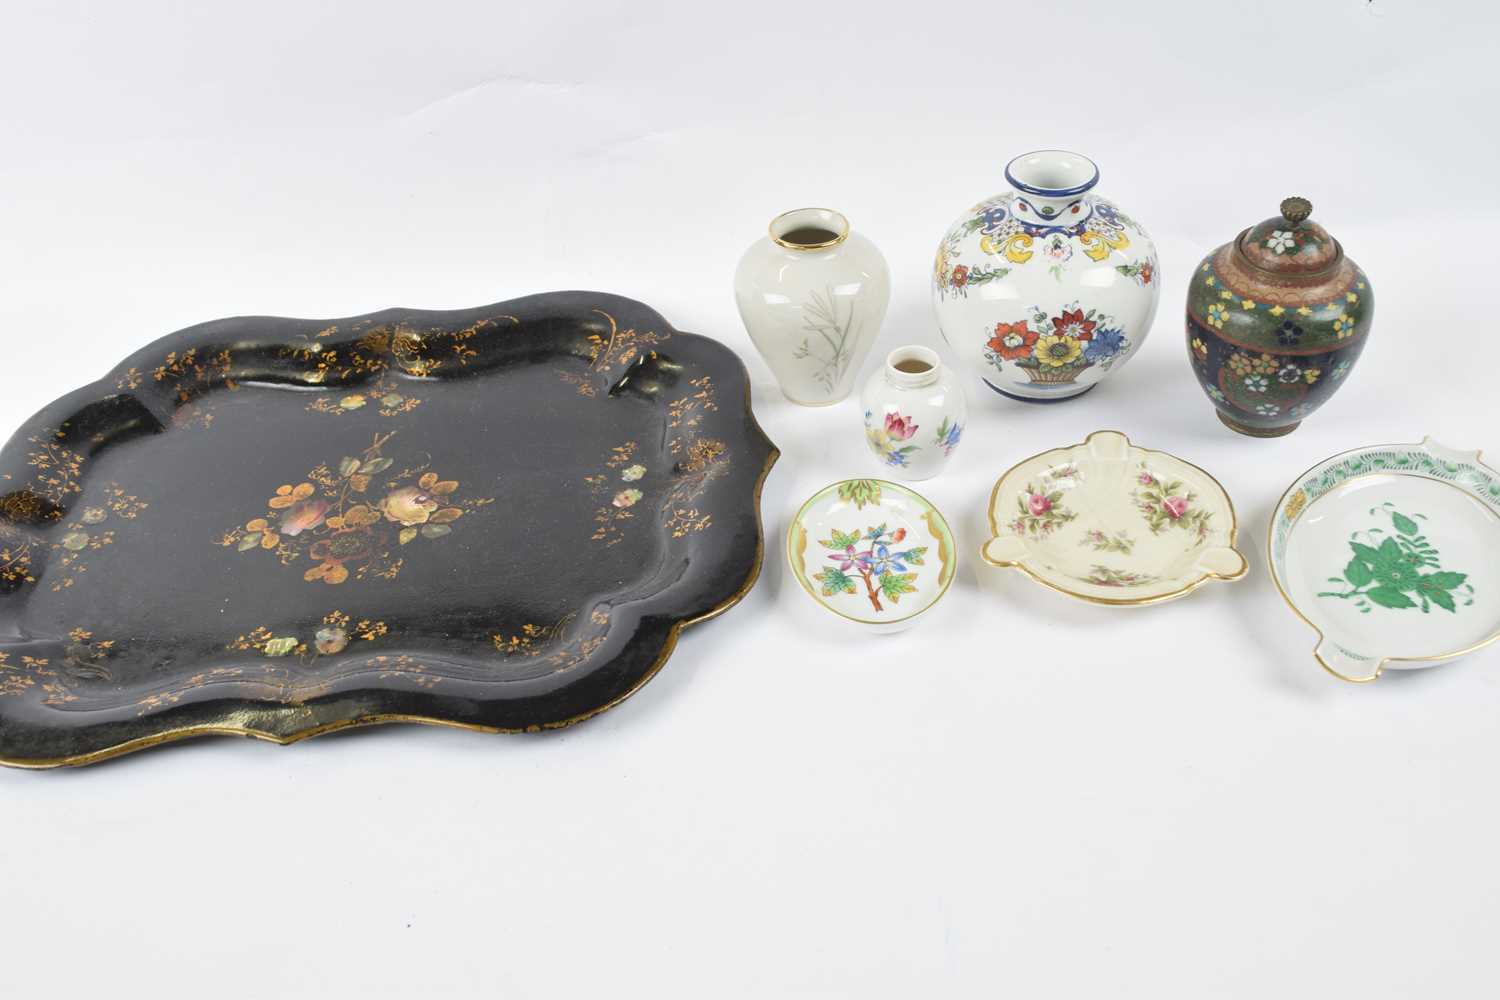 Small Cloisonne jar and cover and other small ceramic items on shaped lacquered tray